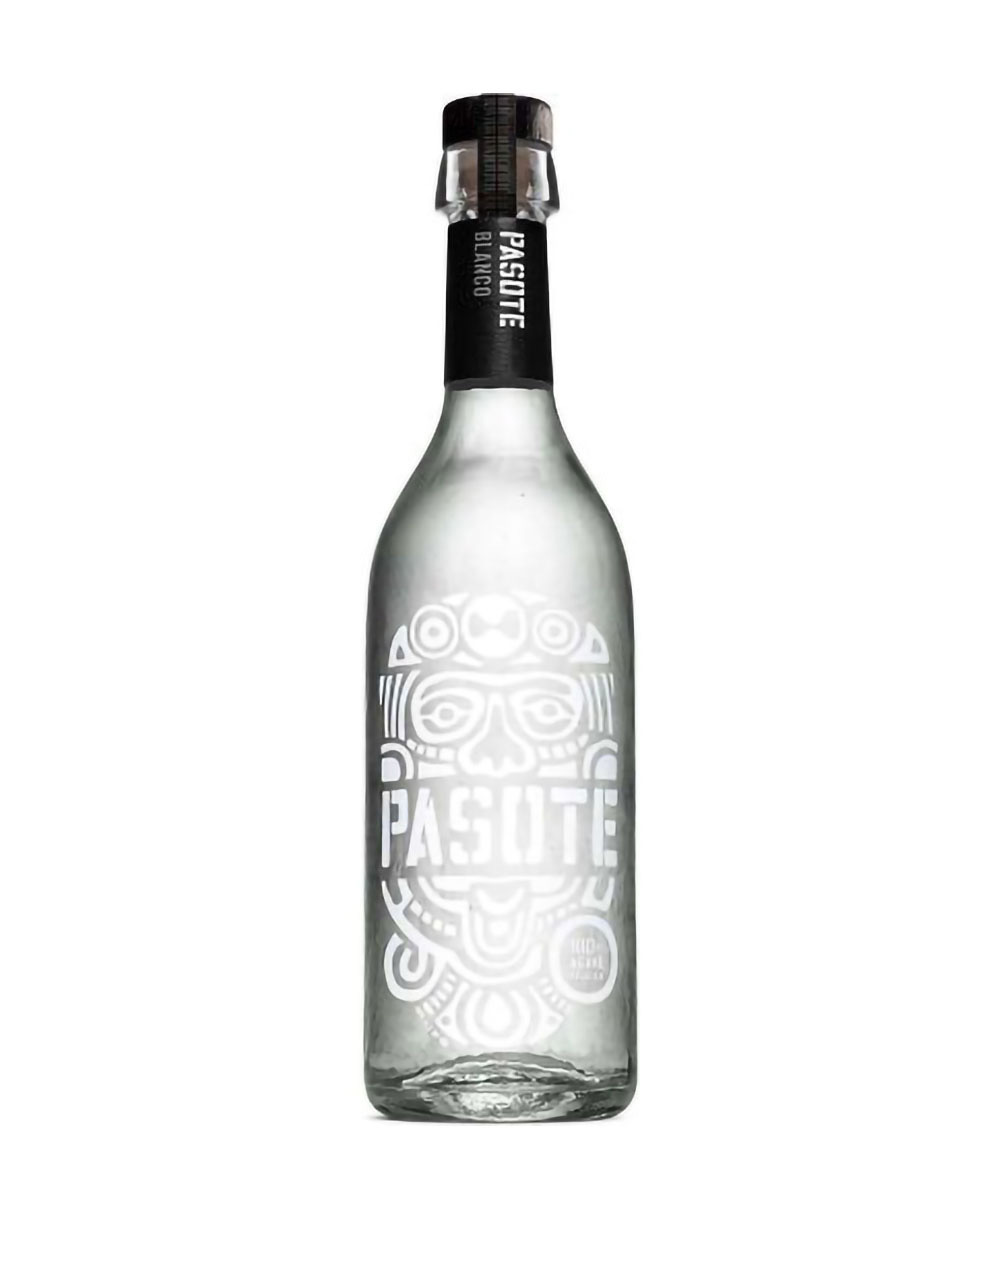 Pasote Tequila Blanco